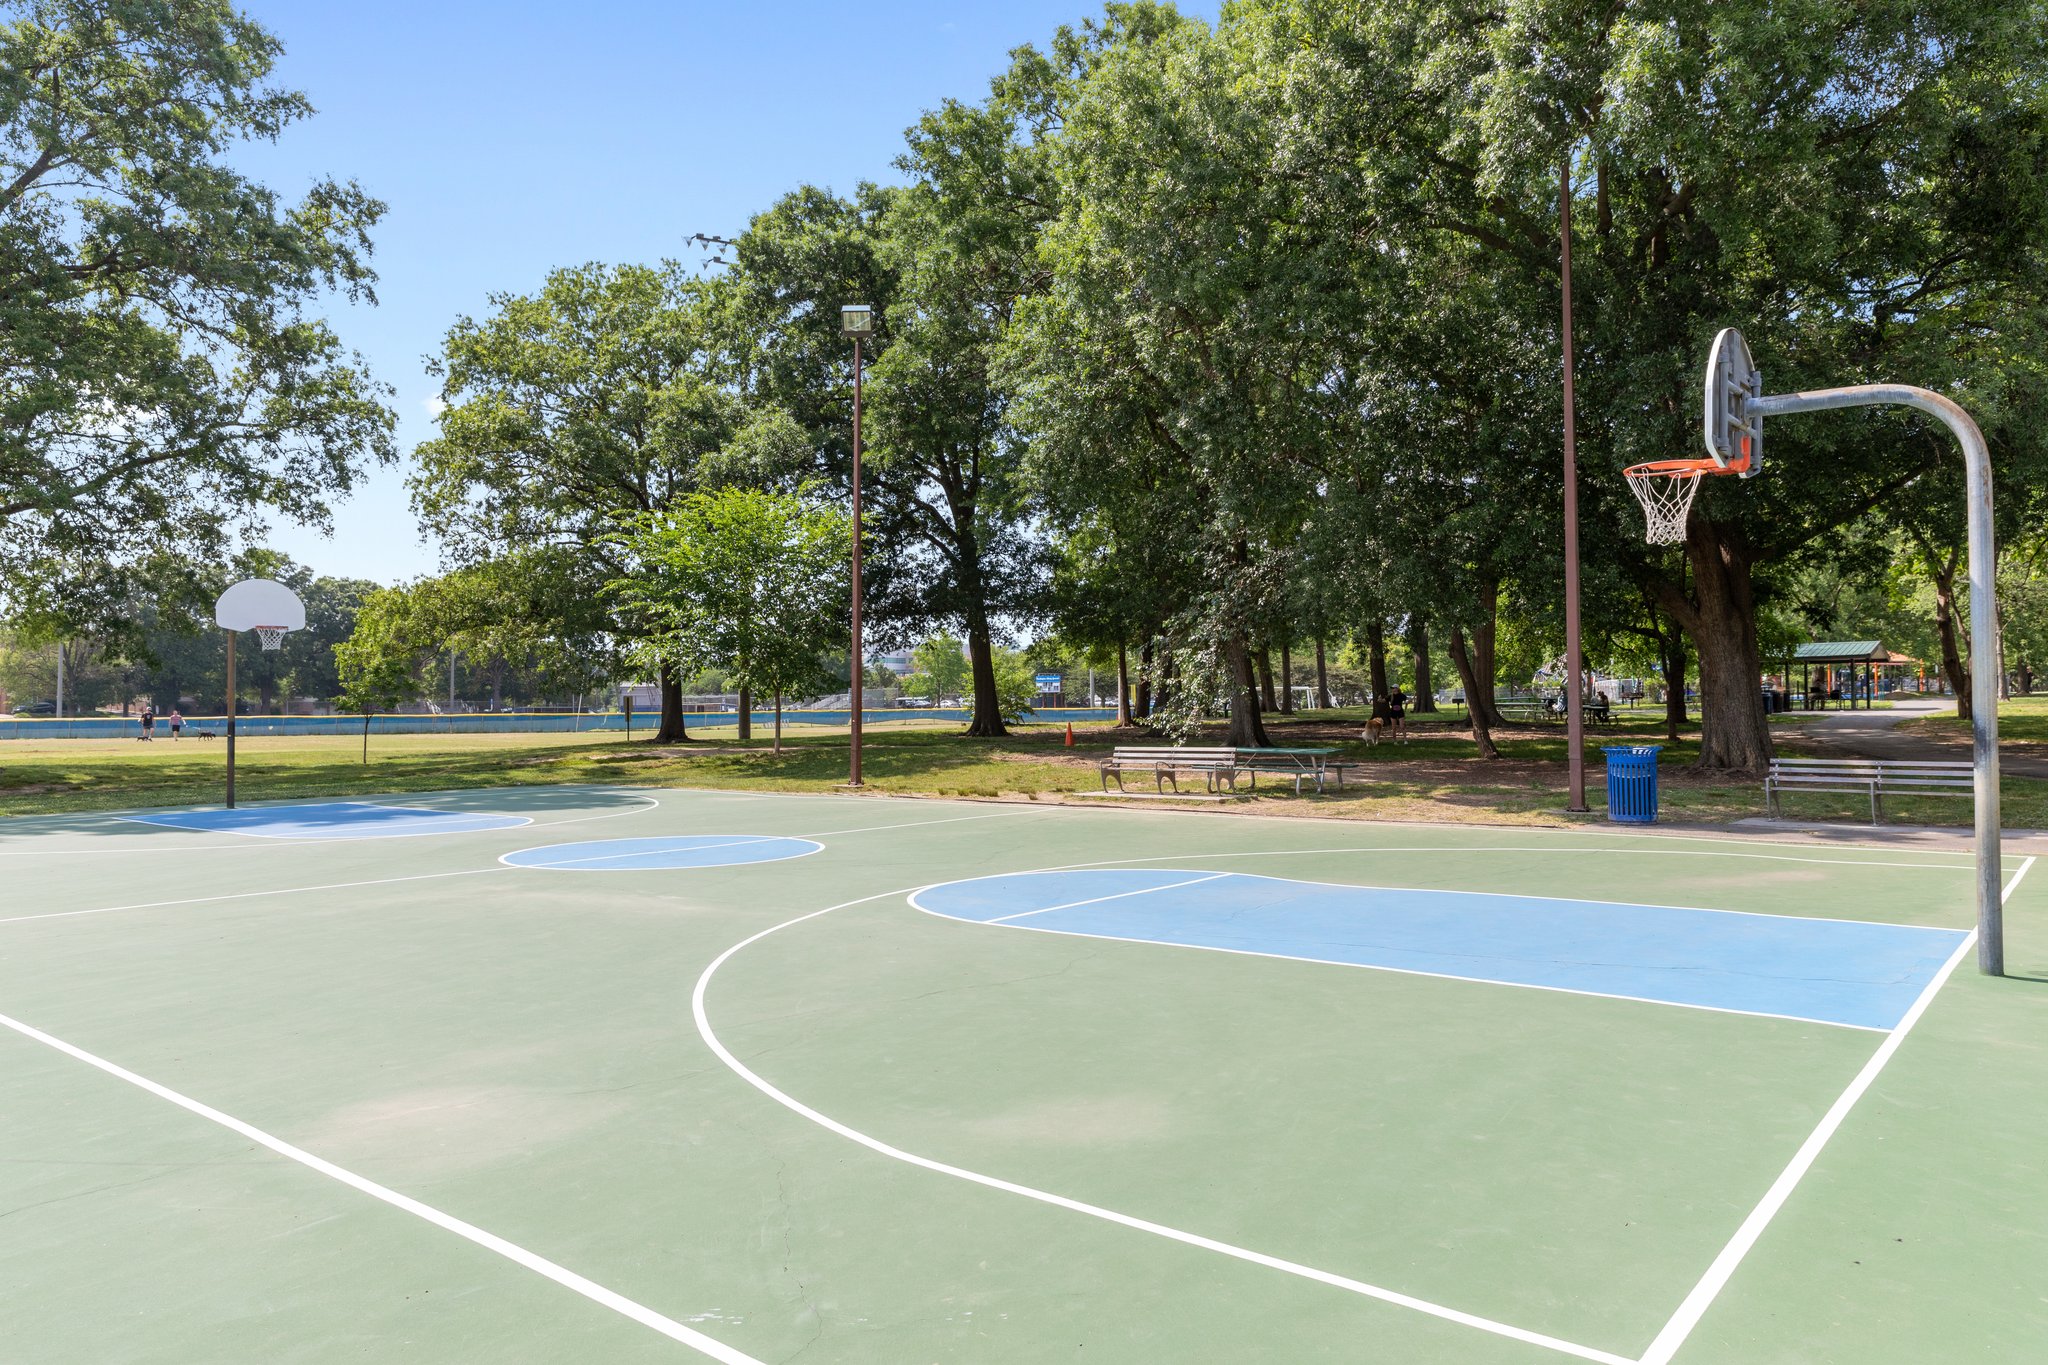 Quincy Park Basketball Courts